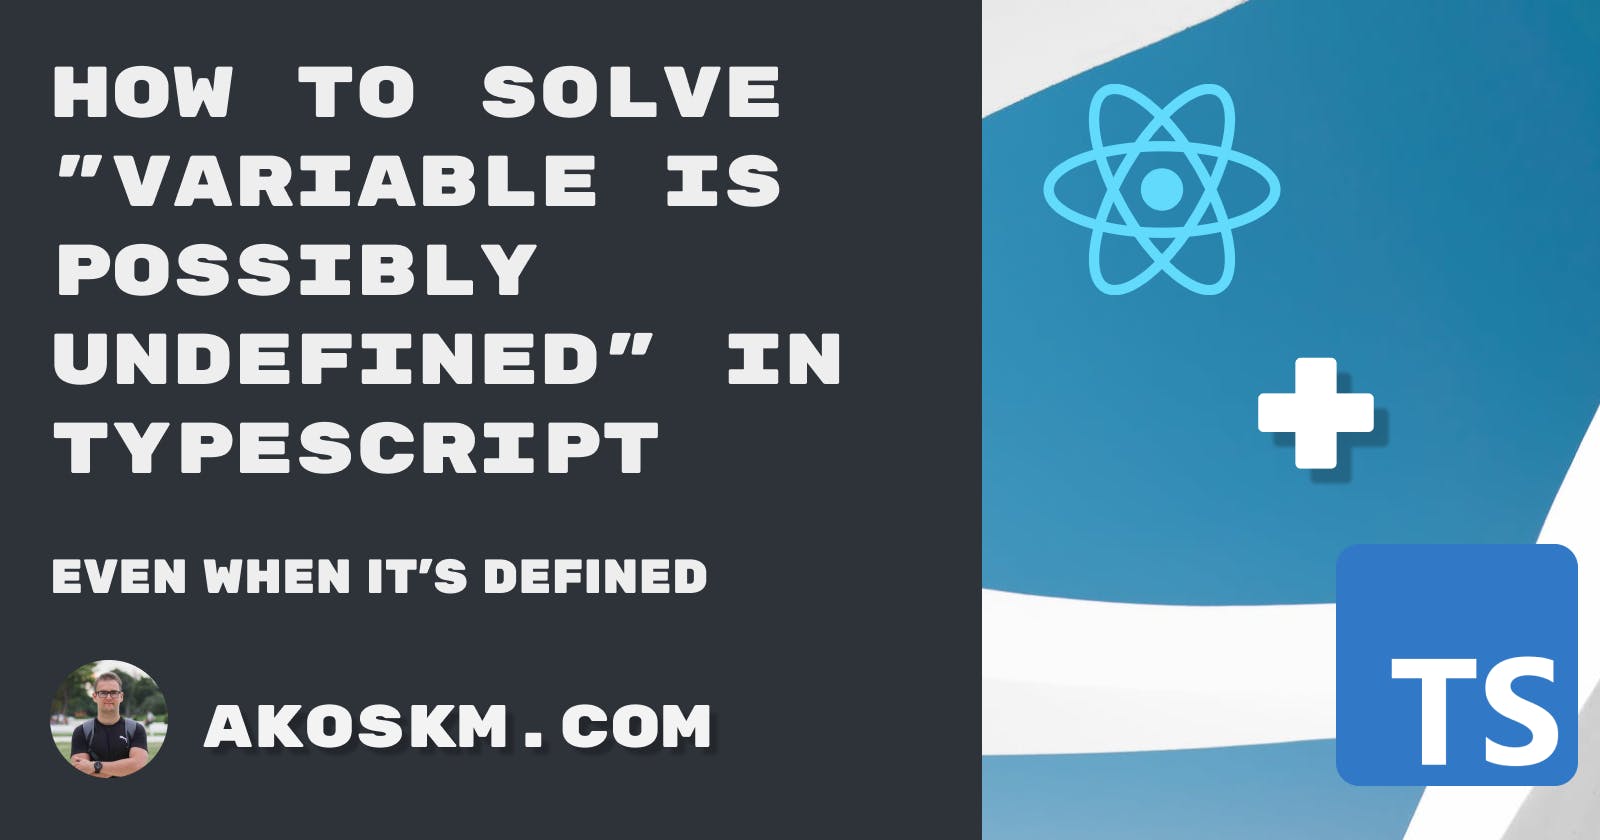 How to solve ”variable is possibly undefined” in TypeScript - even when it’s defined